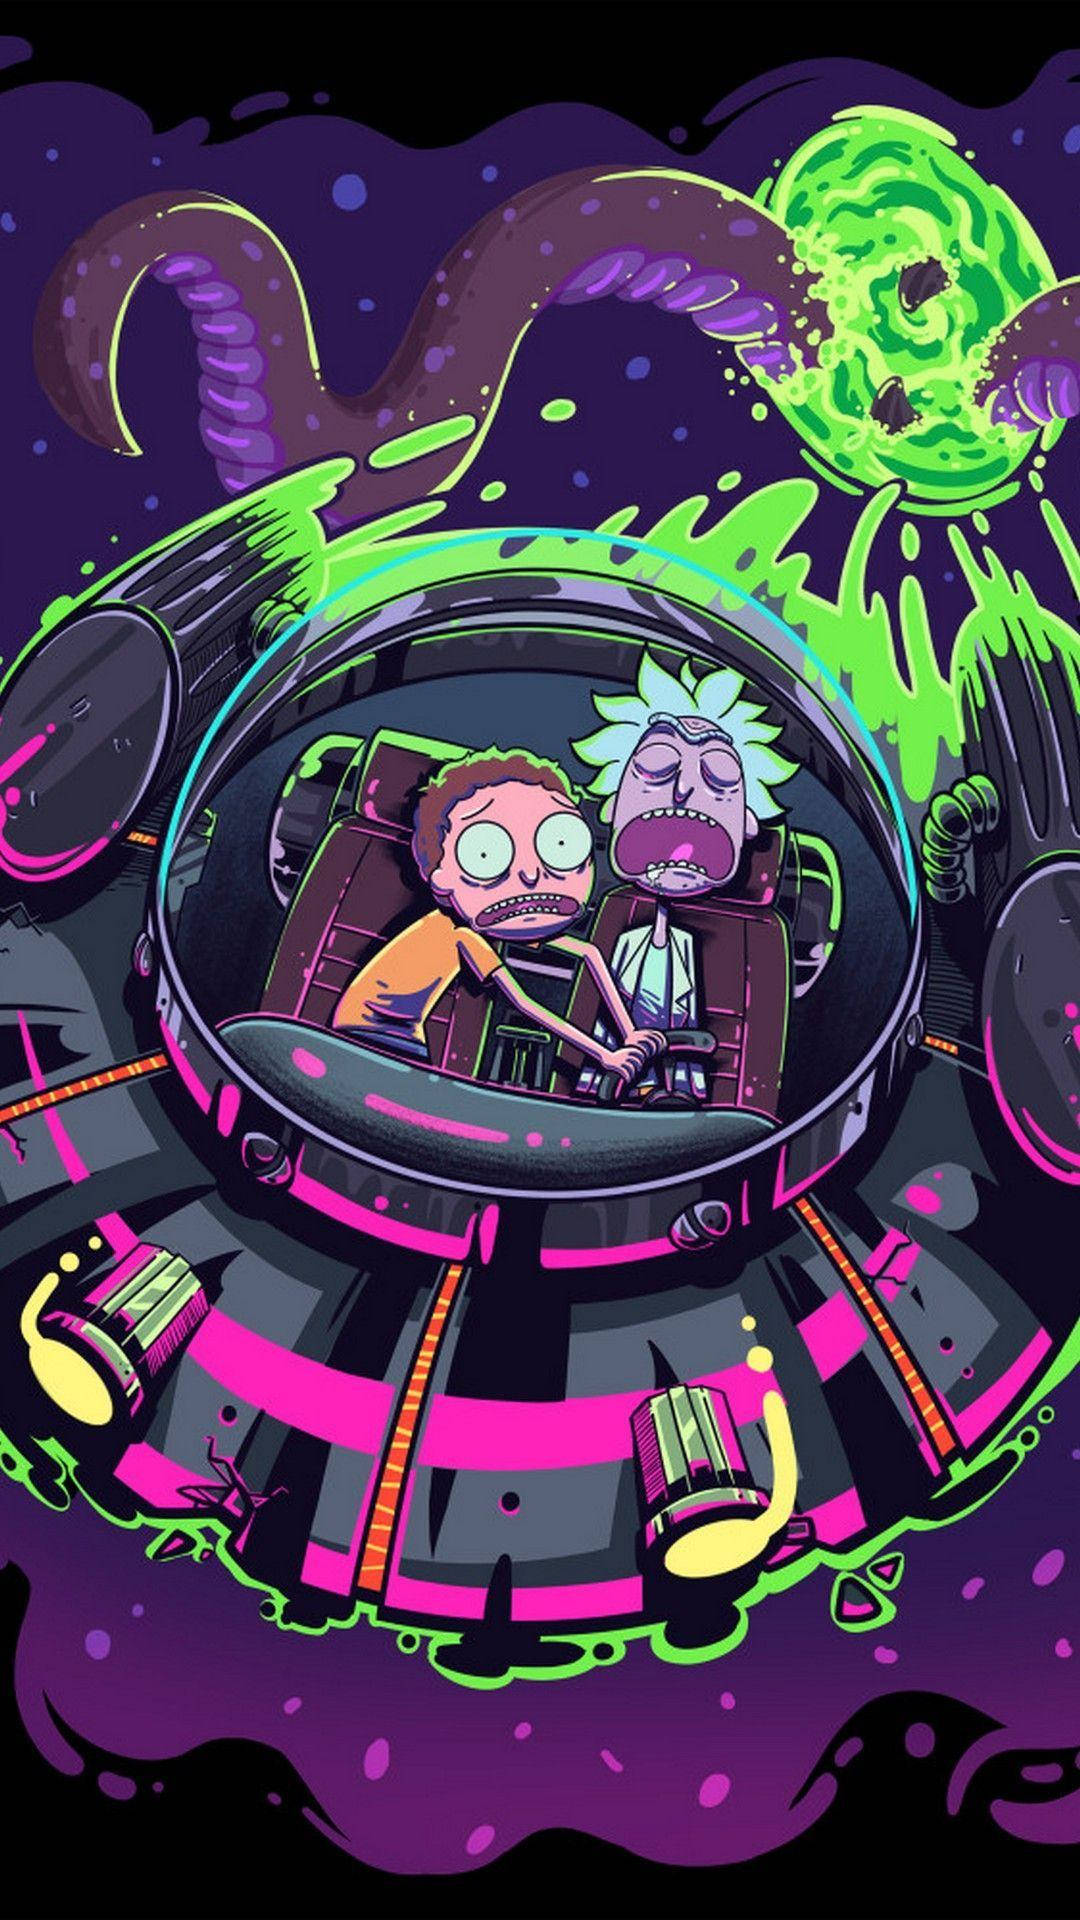 Spaceship Riding Rick And Morty Iphone Wallpaper